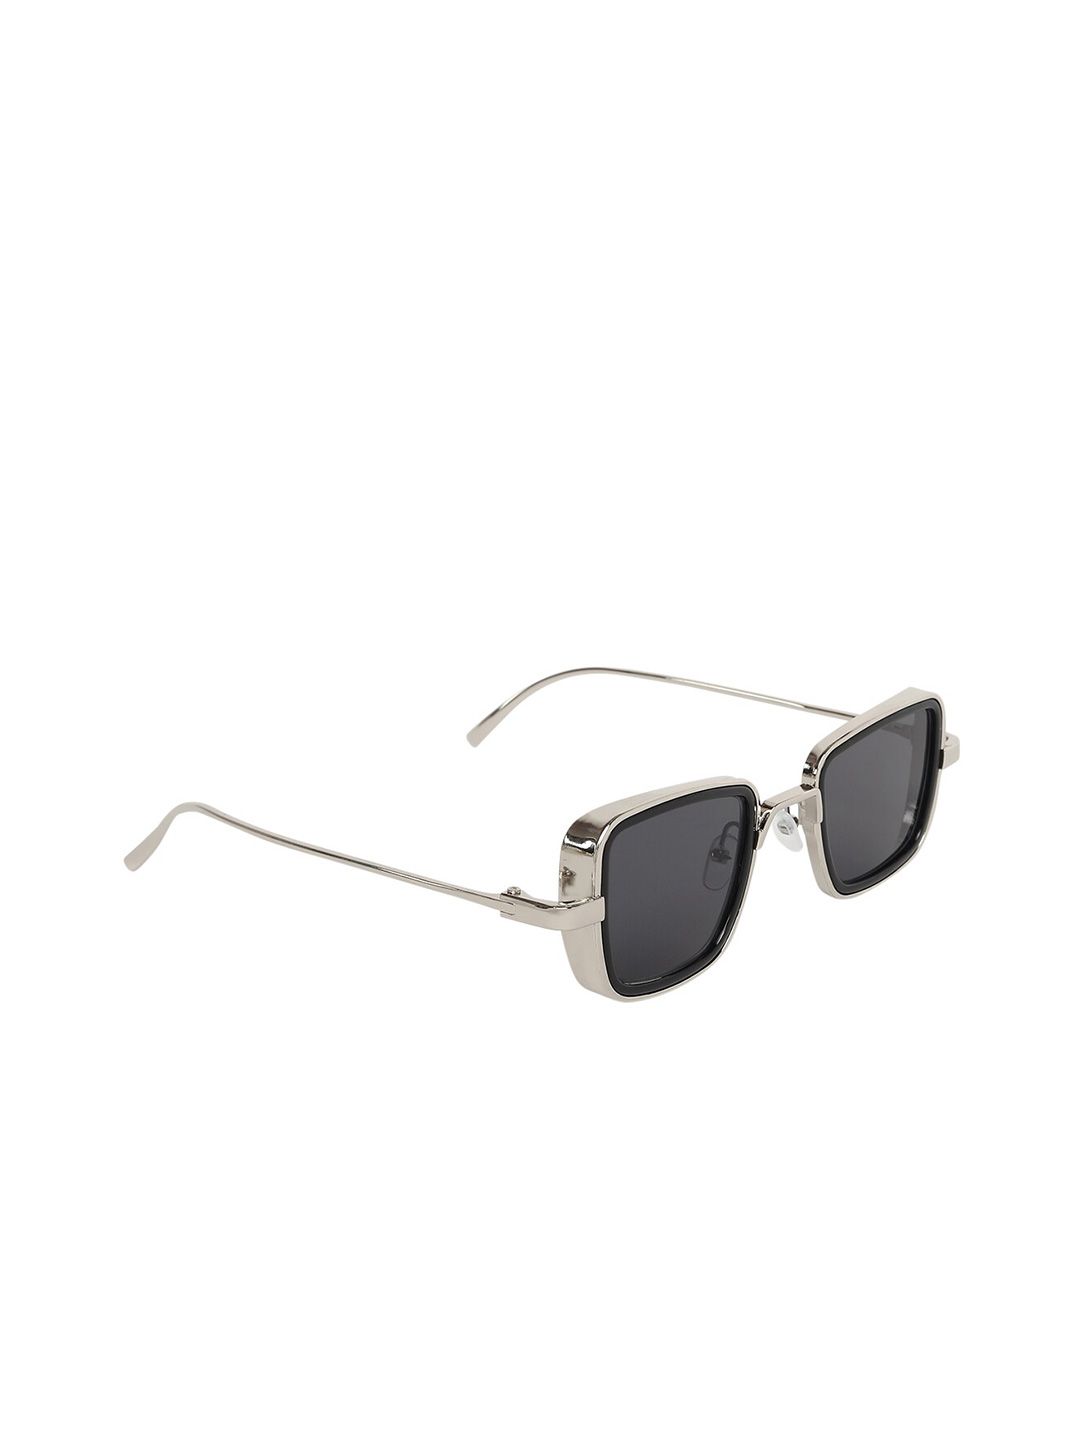 CRIBA Unisex Black Lens & Steel-Toned Rectangle Sunglasses with UV Protected Lens Price in India